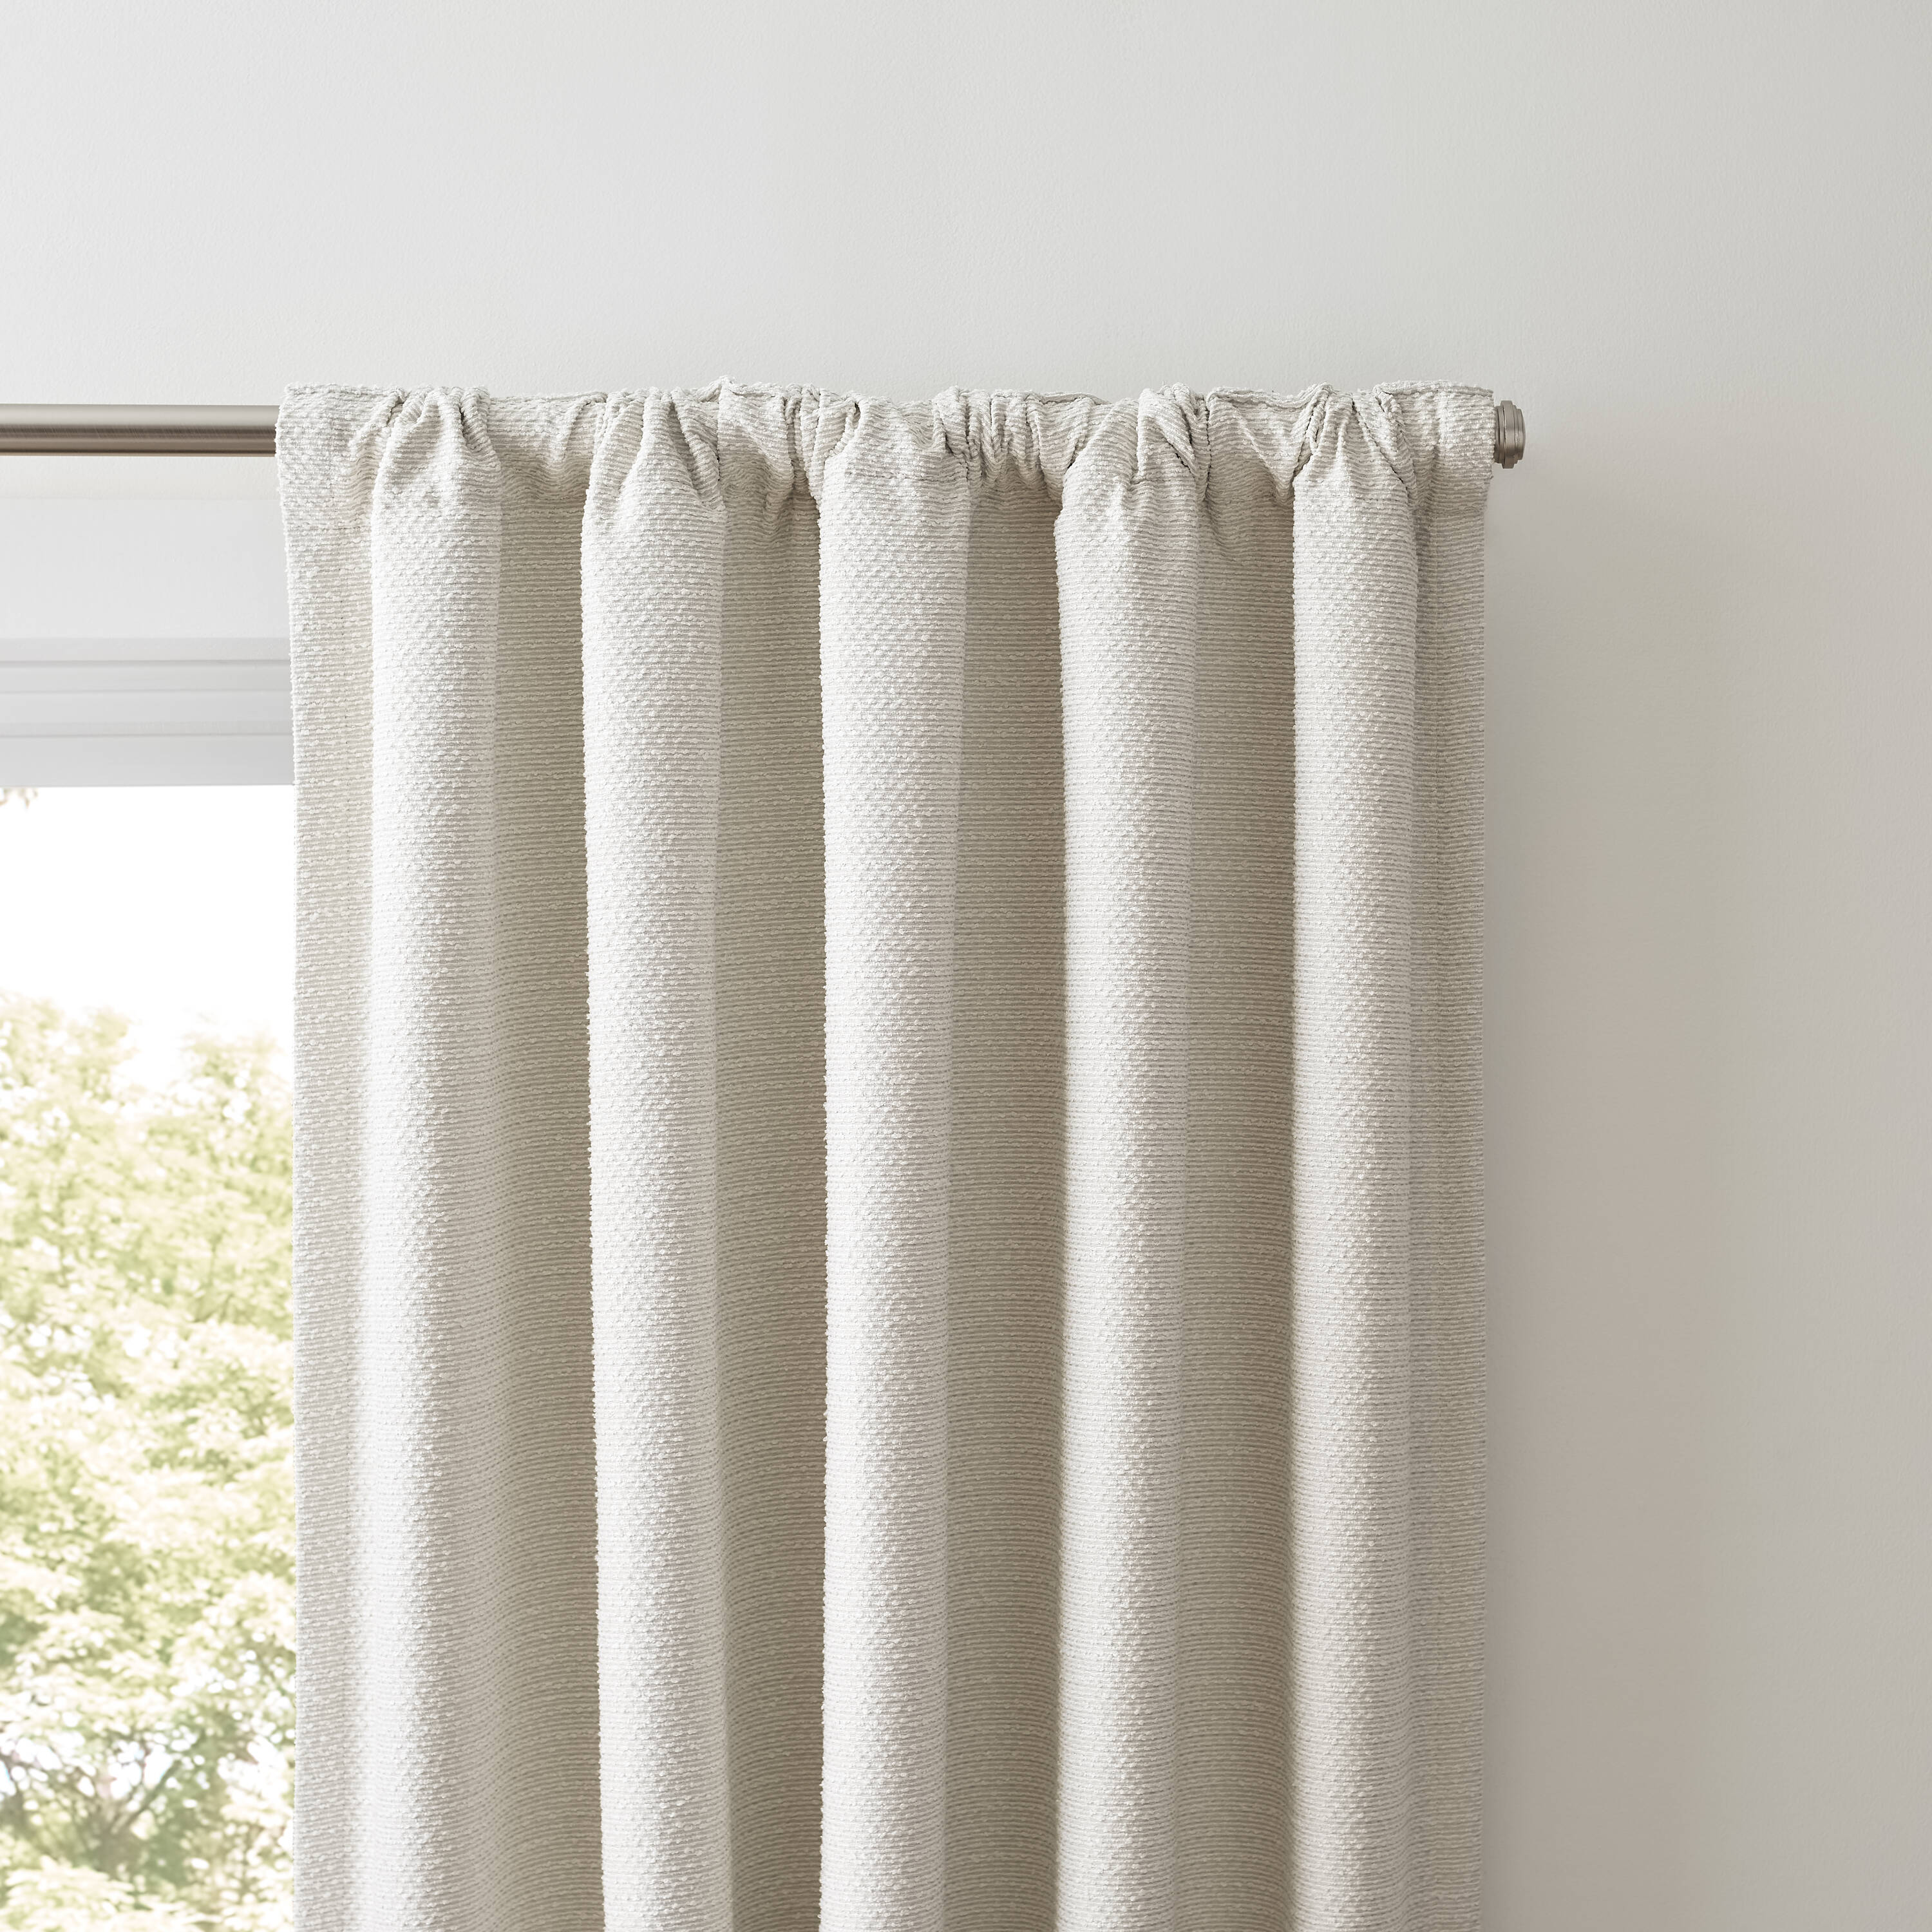 84-in in Back Curtain Panel 21 department the Ivory Single Curtains & Blackout at Lined Thermal Origin Tab Drapes